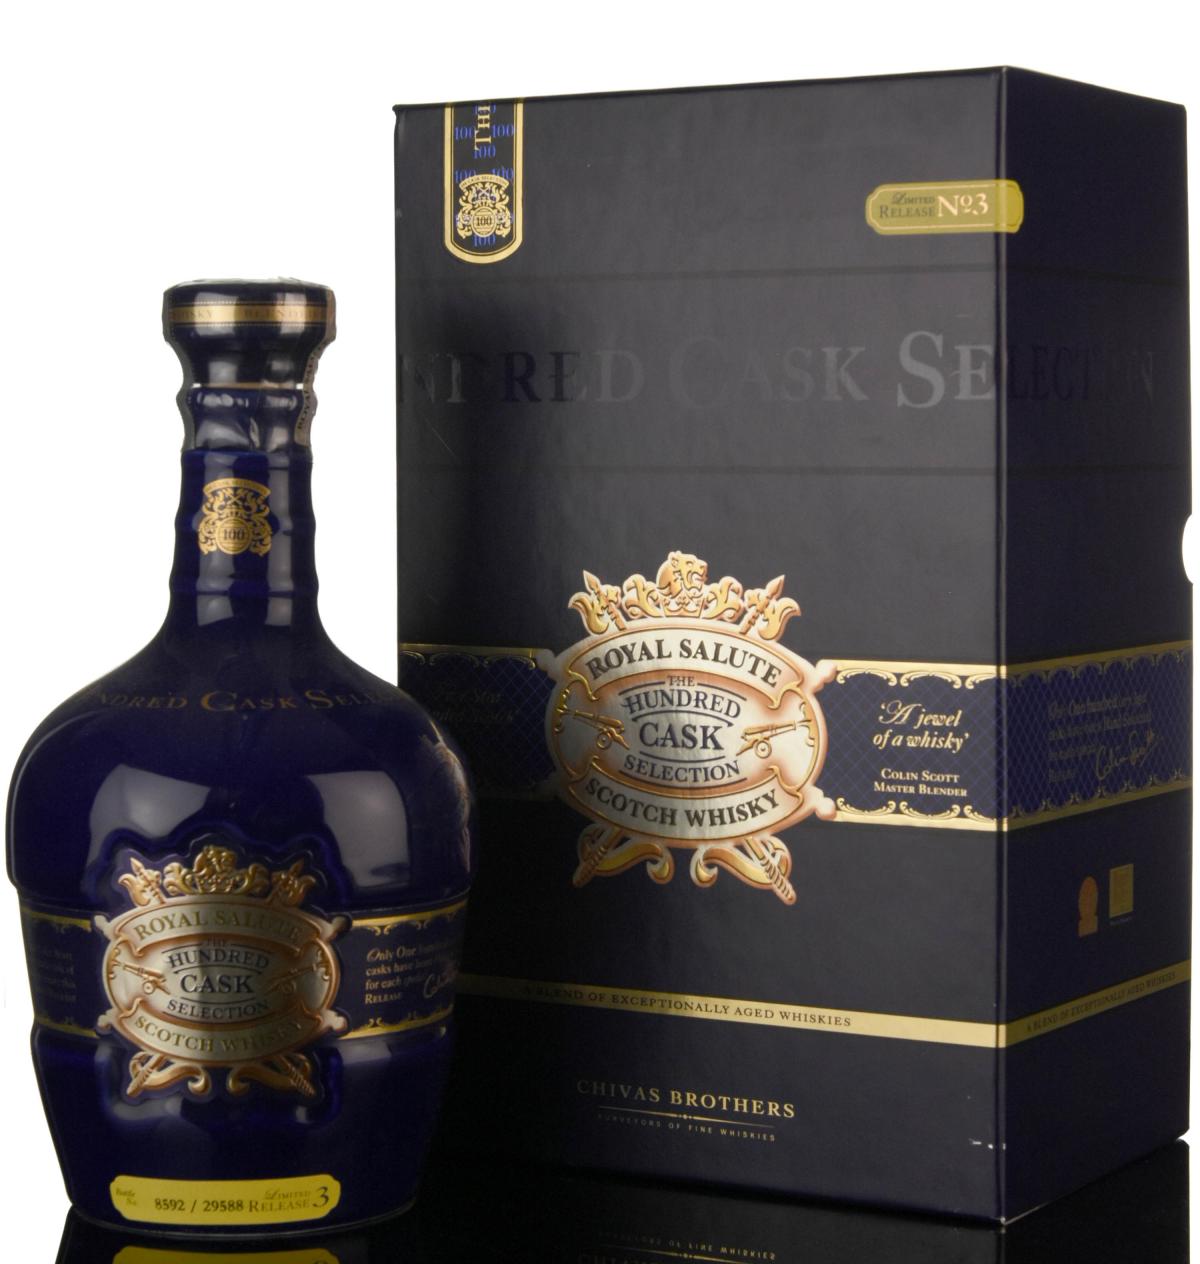 Royal Salute Hundred Cask Selection - Release No.3